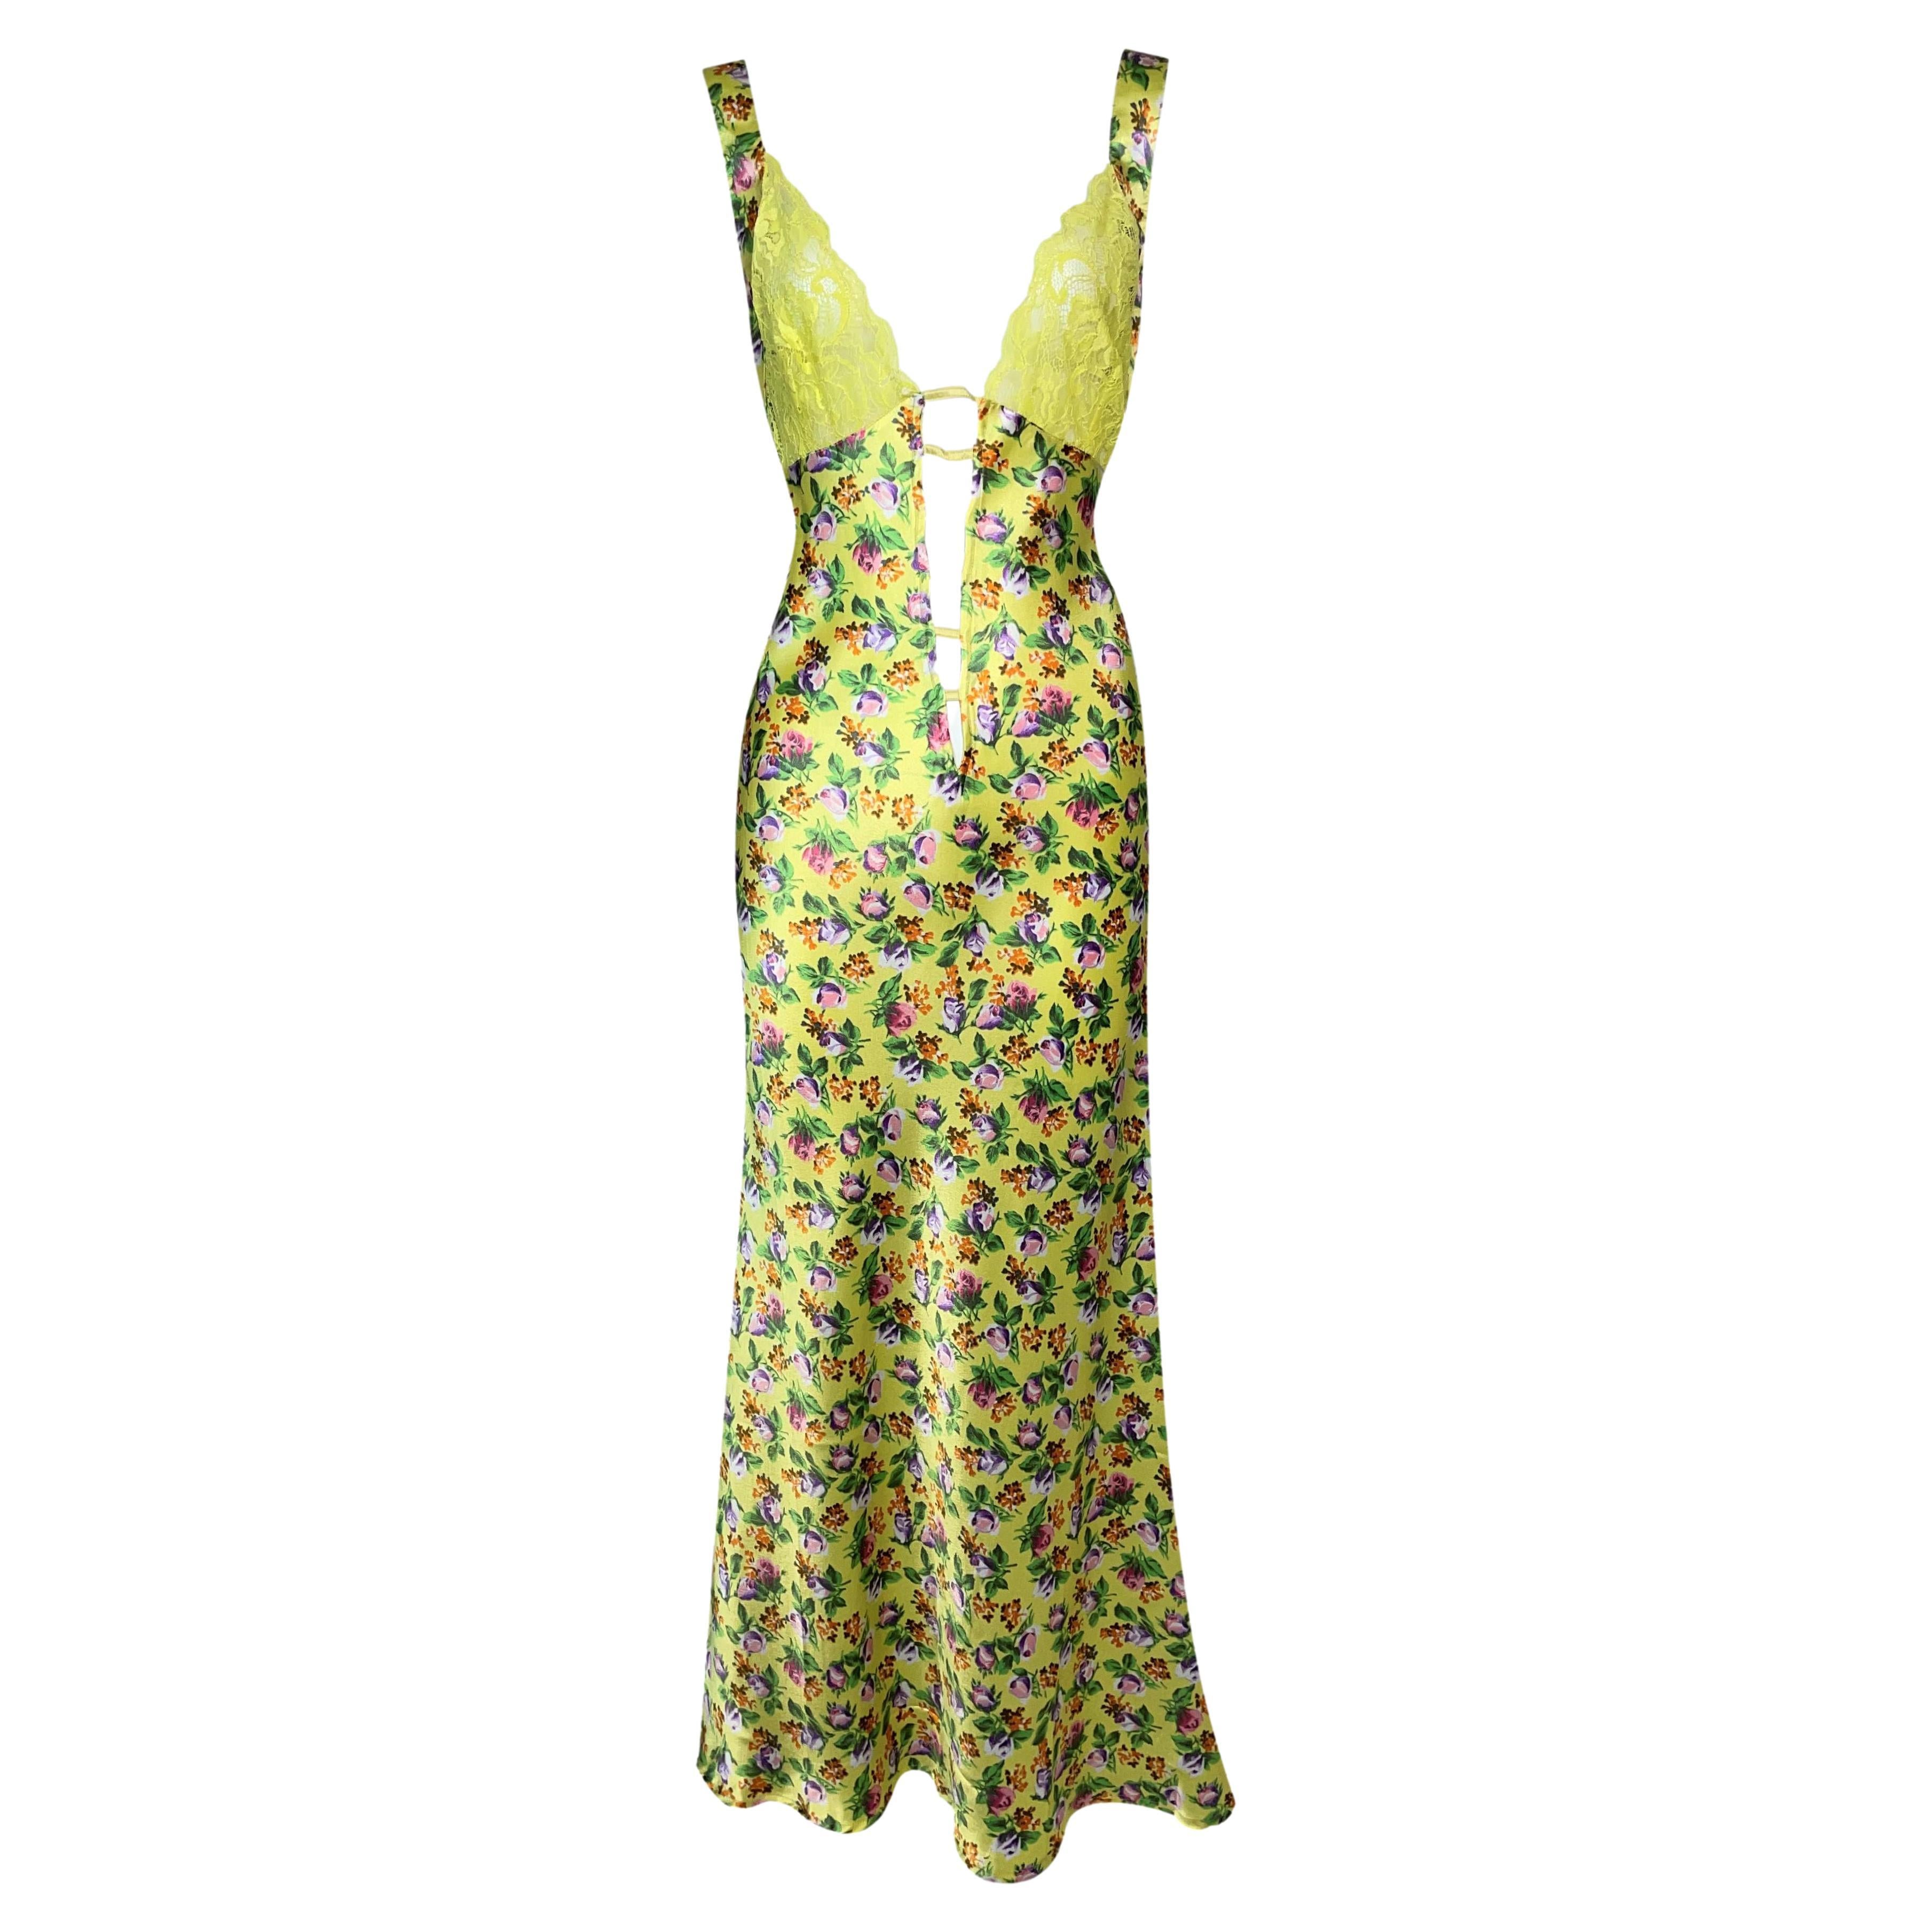 C. 1993 Gianni Versace Plunging Yellow Floral Satin Slip Gown Dress